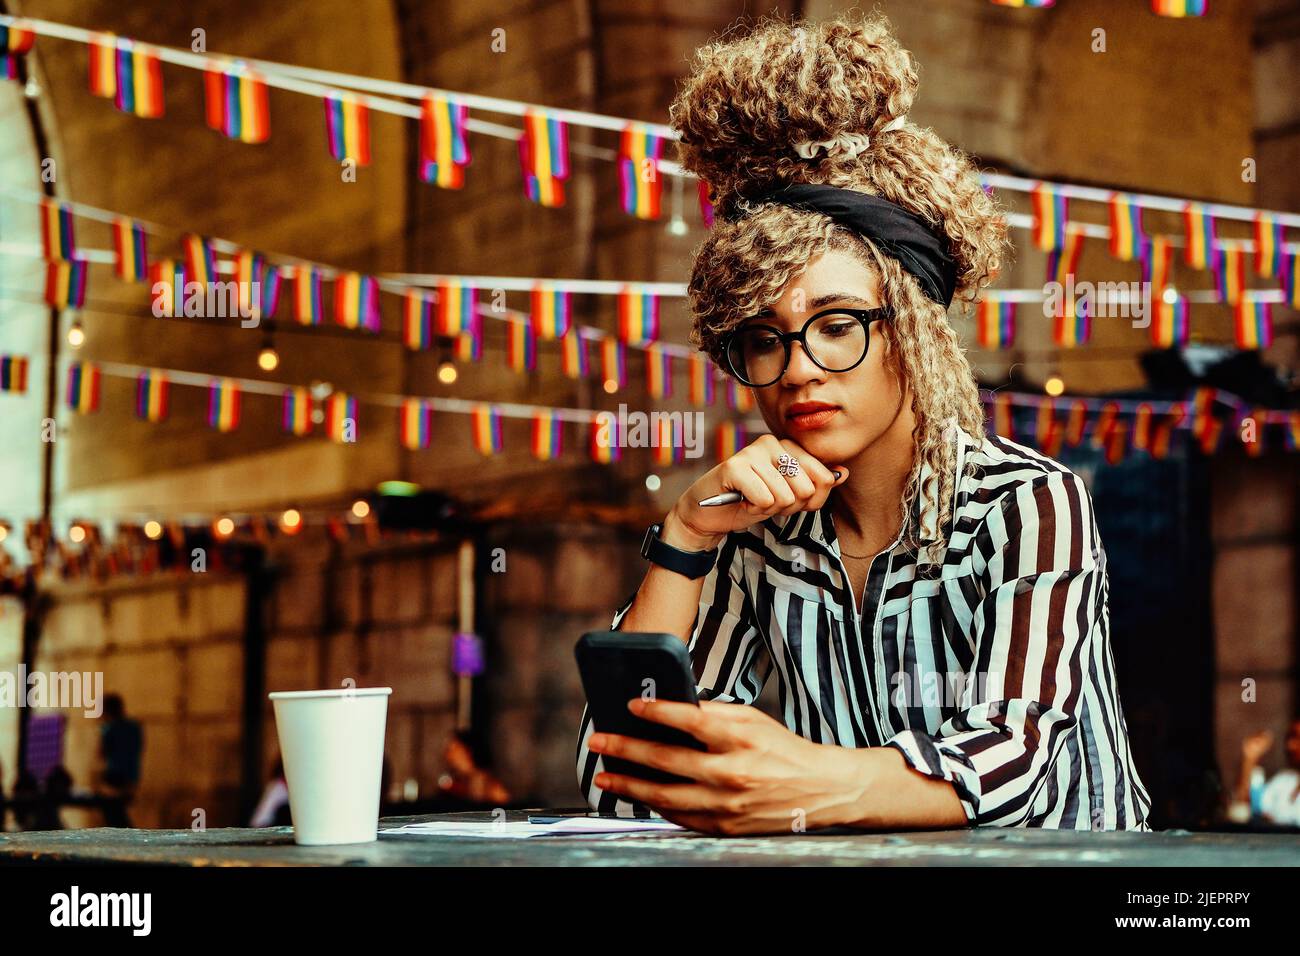 Portrait of serious woman with afro hairstyle reading news on smartphone sitting in a coffeehouse shot Stock Photo